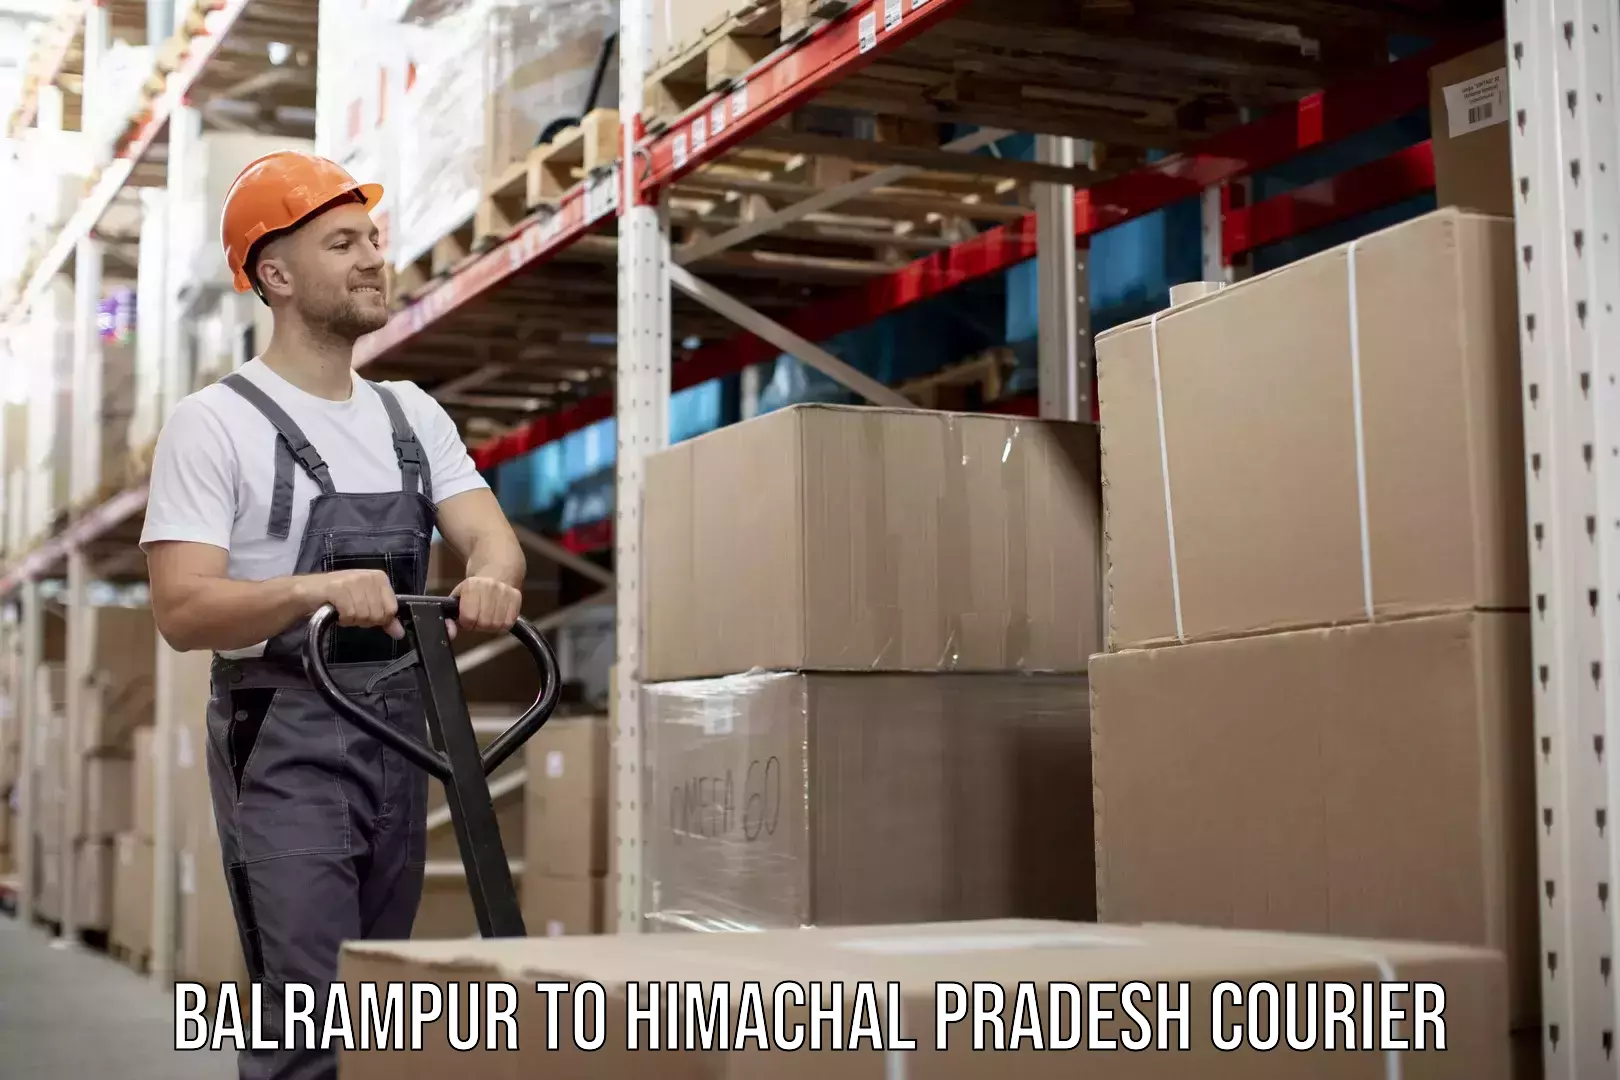 Advanced delivery network Balrampur to Himachal Pradesh